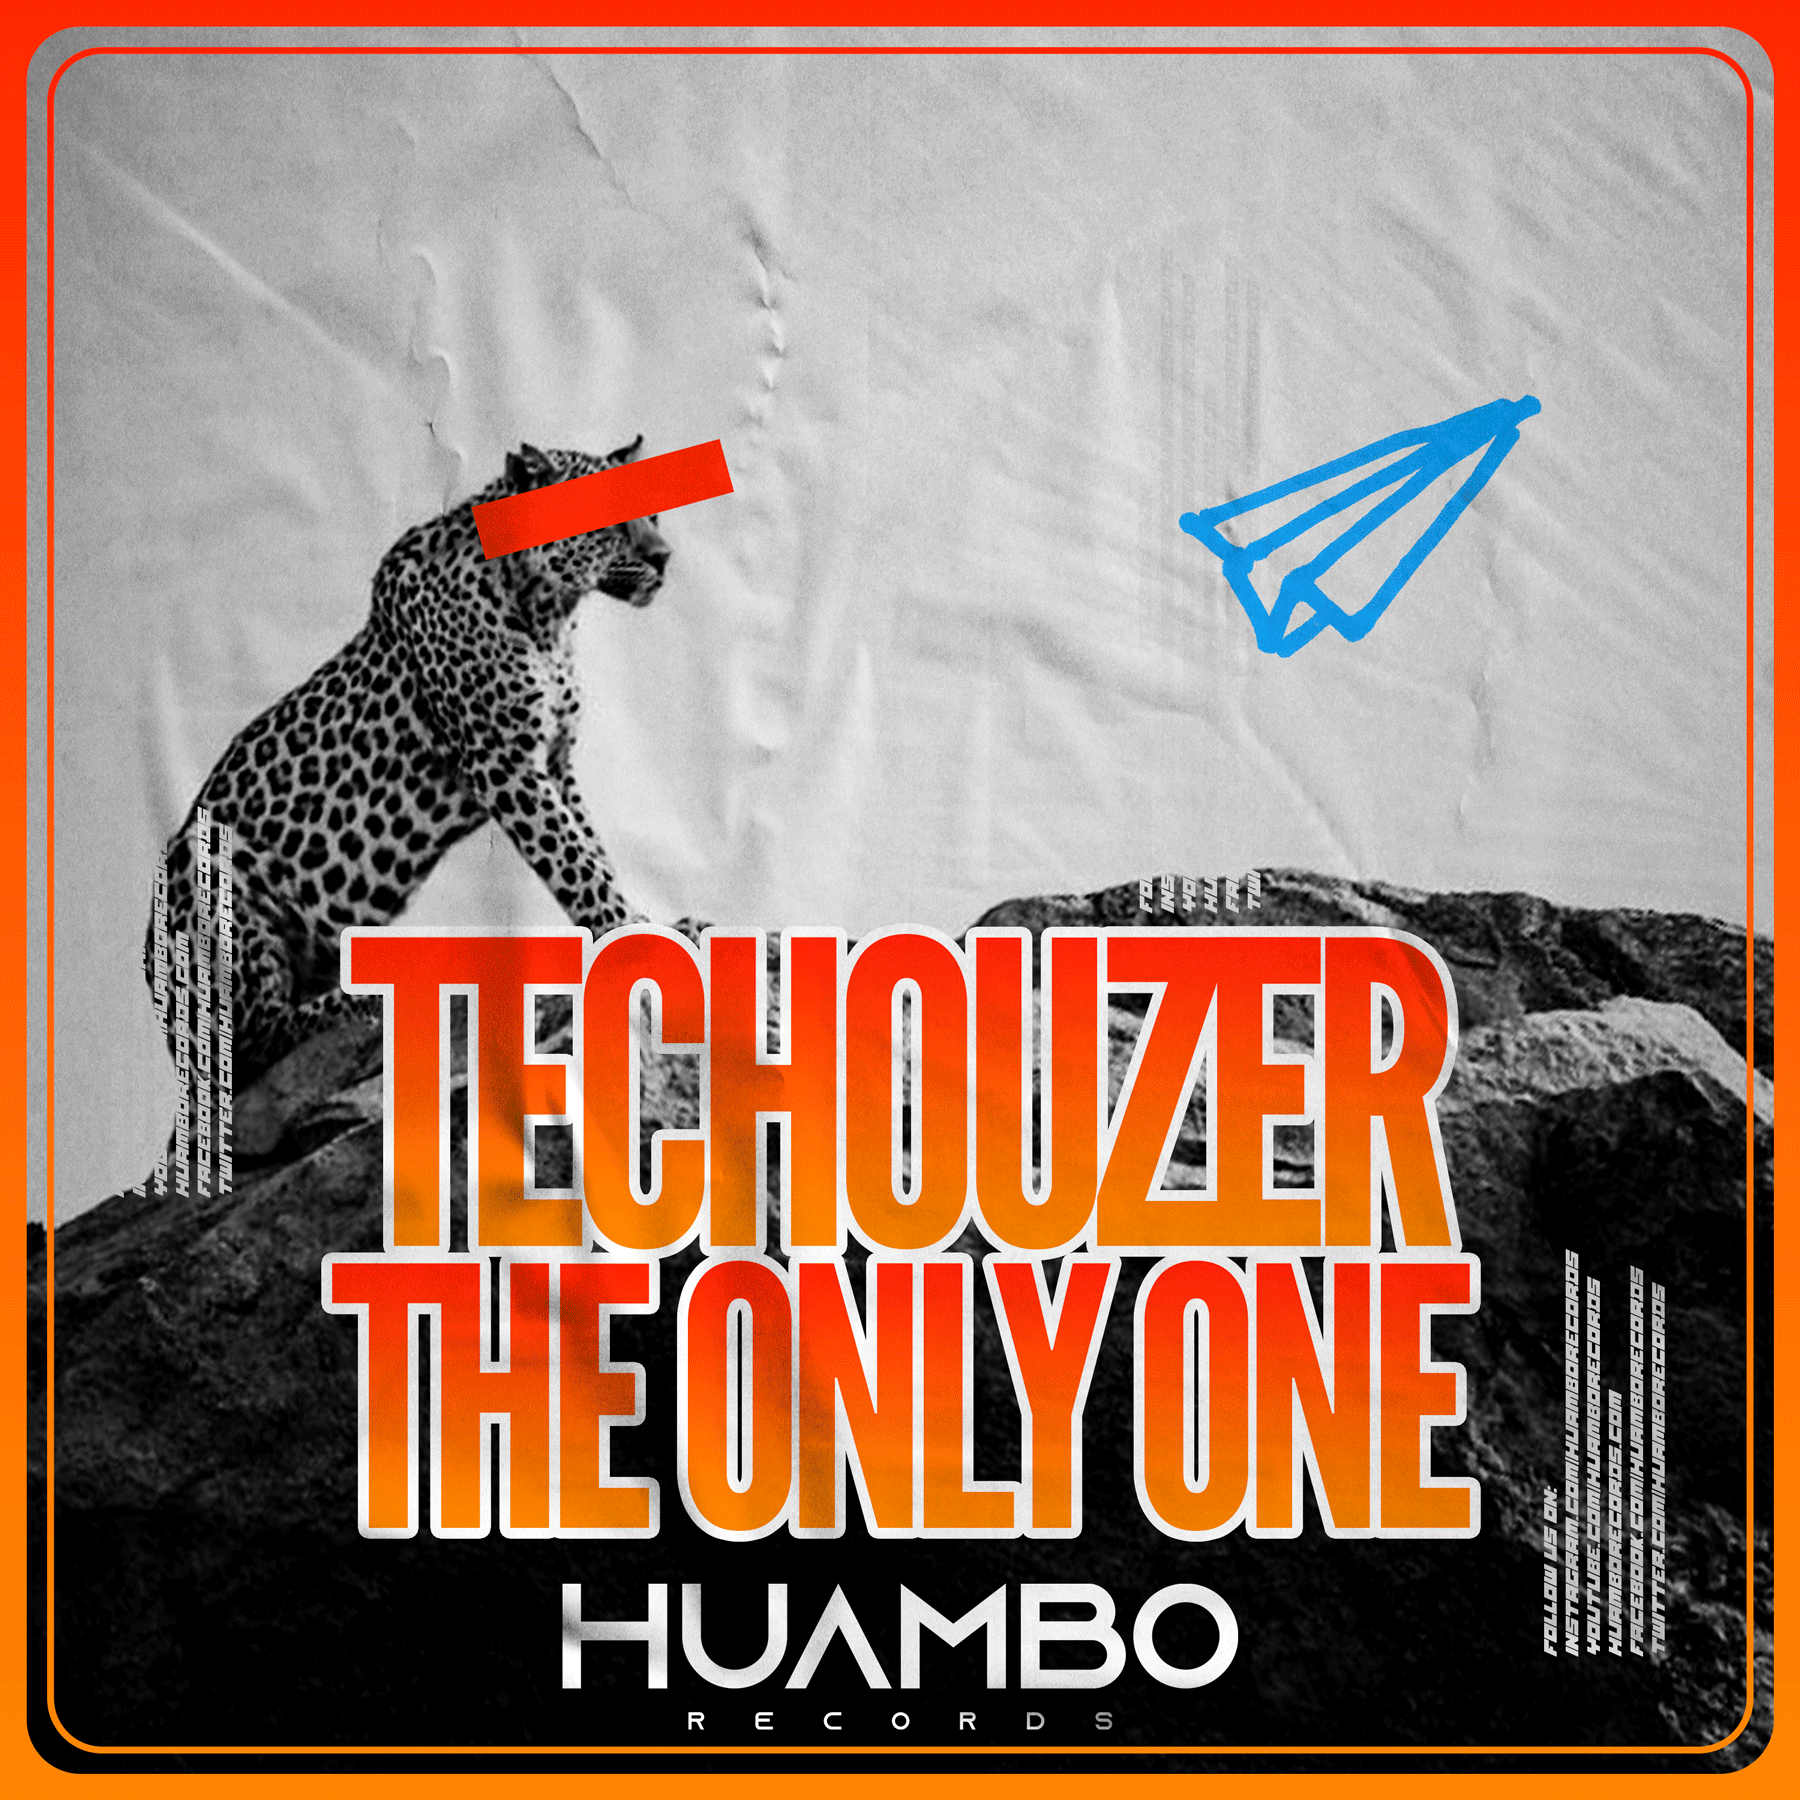 Spanish DJ and producer TecHouzer is back with "The Only One"